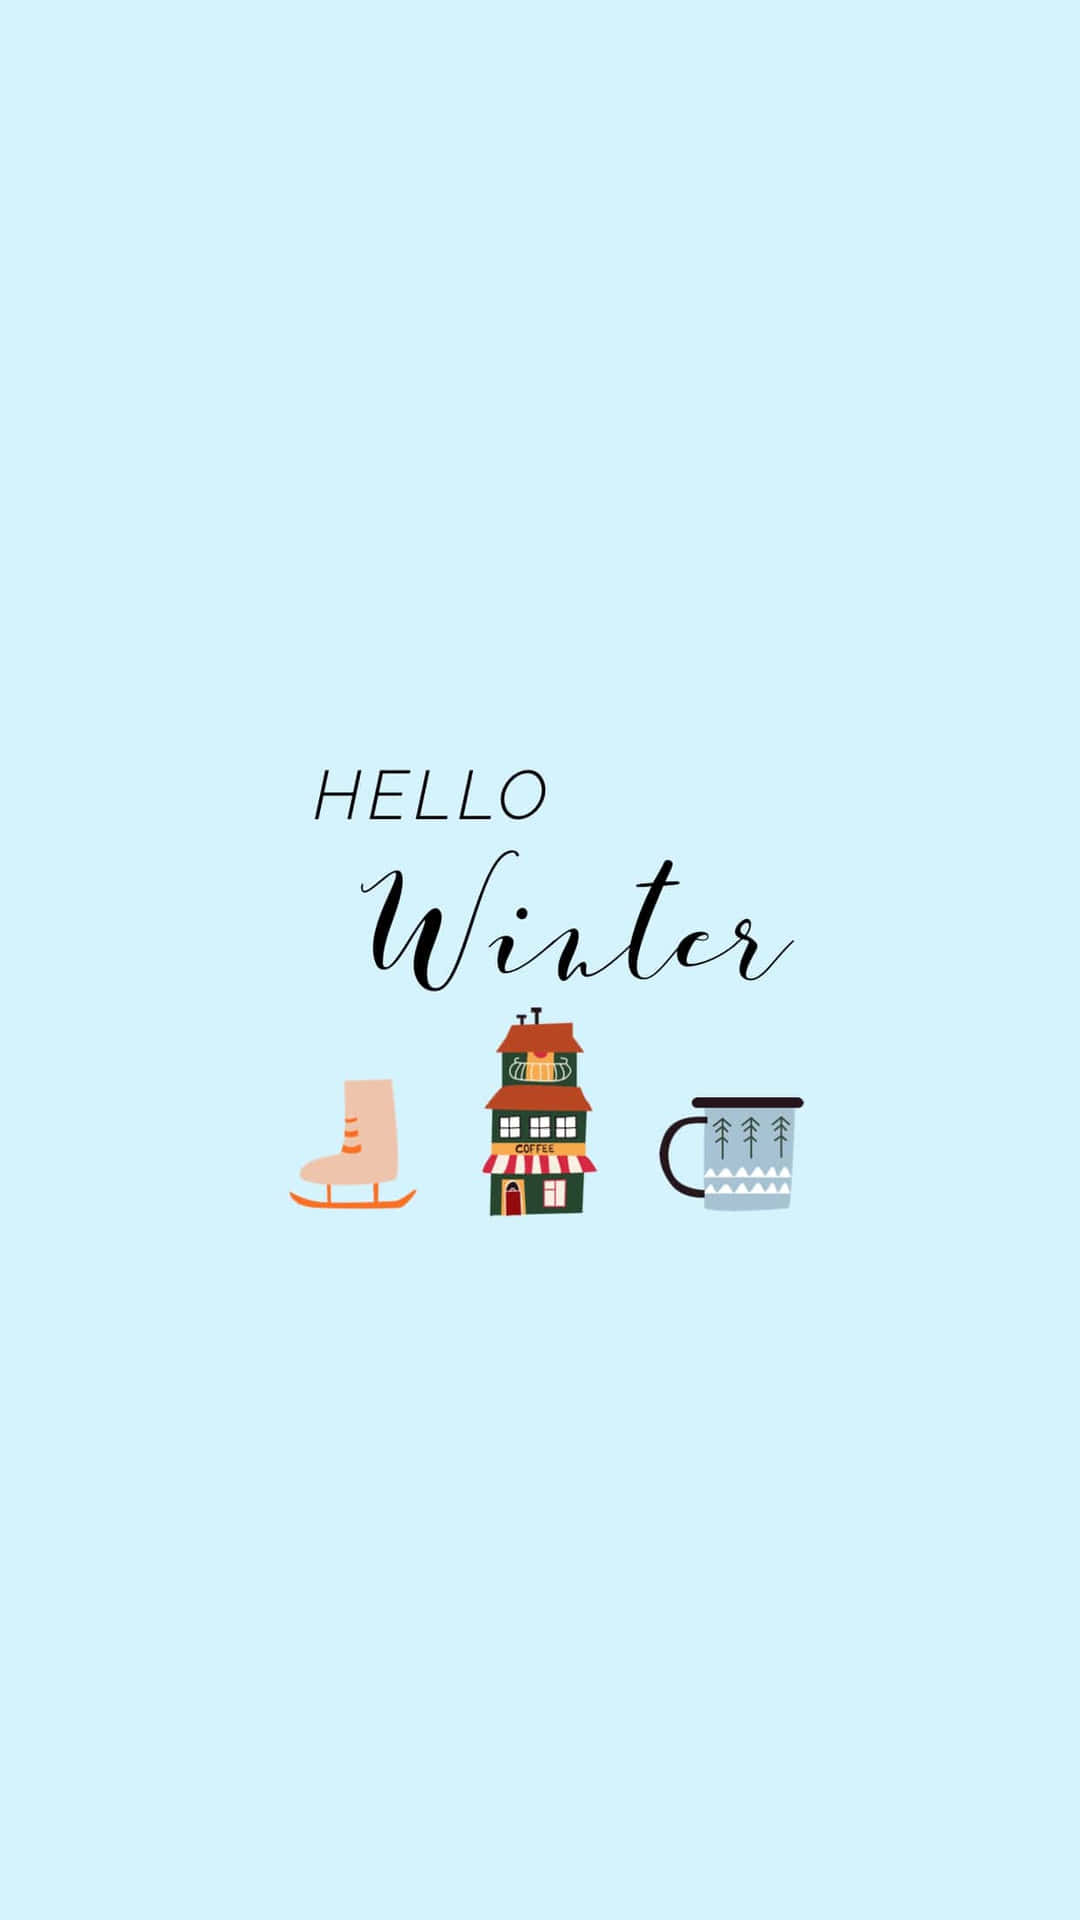 💕Aesthetic Wallpapers💕 (discontinued:[ ) - ❄️Snowy/Winter Wallpaper❄️ -  Wattpad